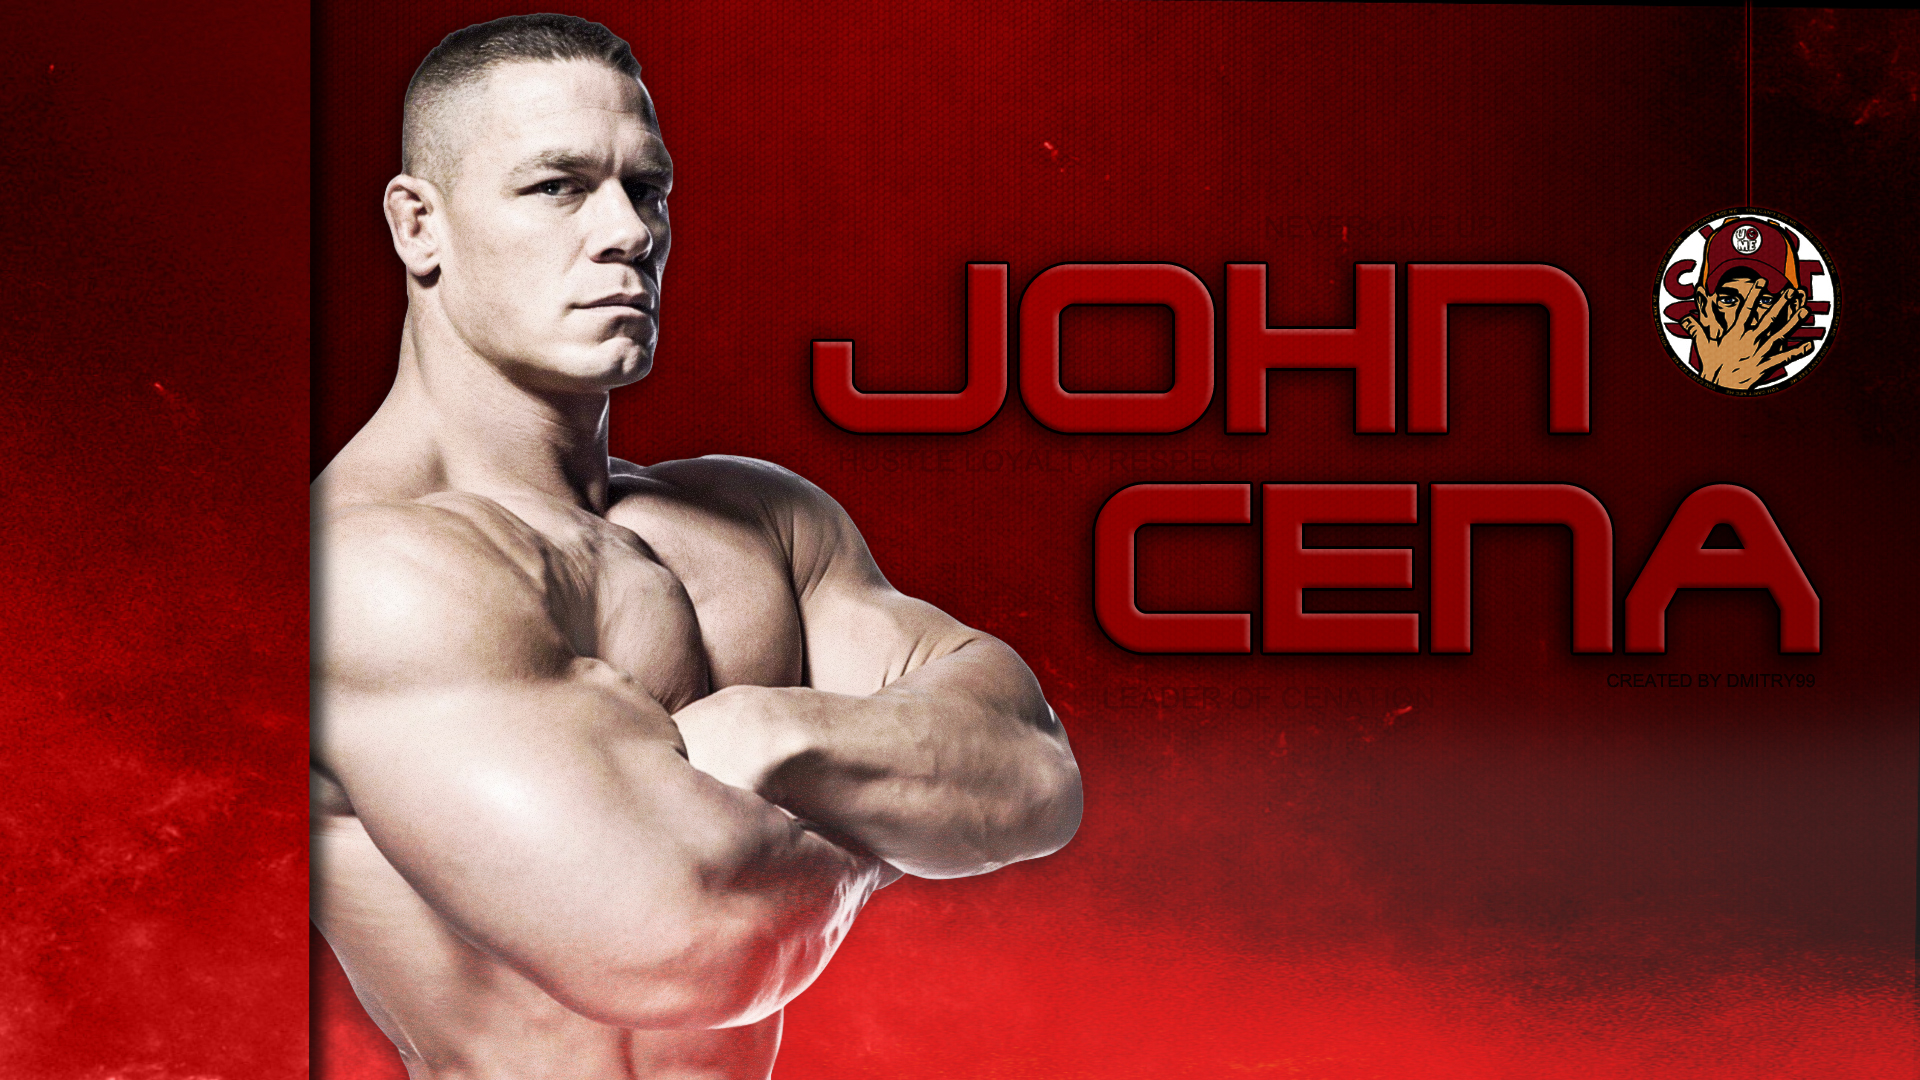 Wwe John Cena Mobile Wallpaper Top Collections Of Pictures